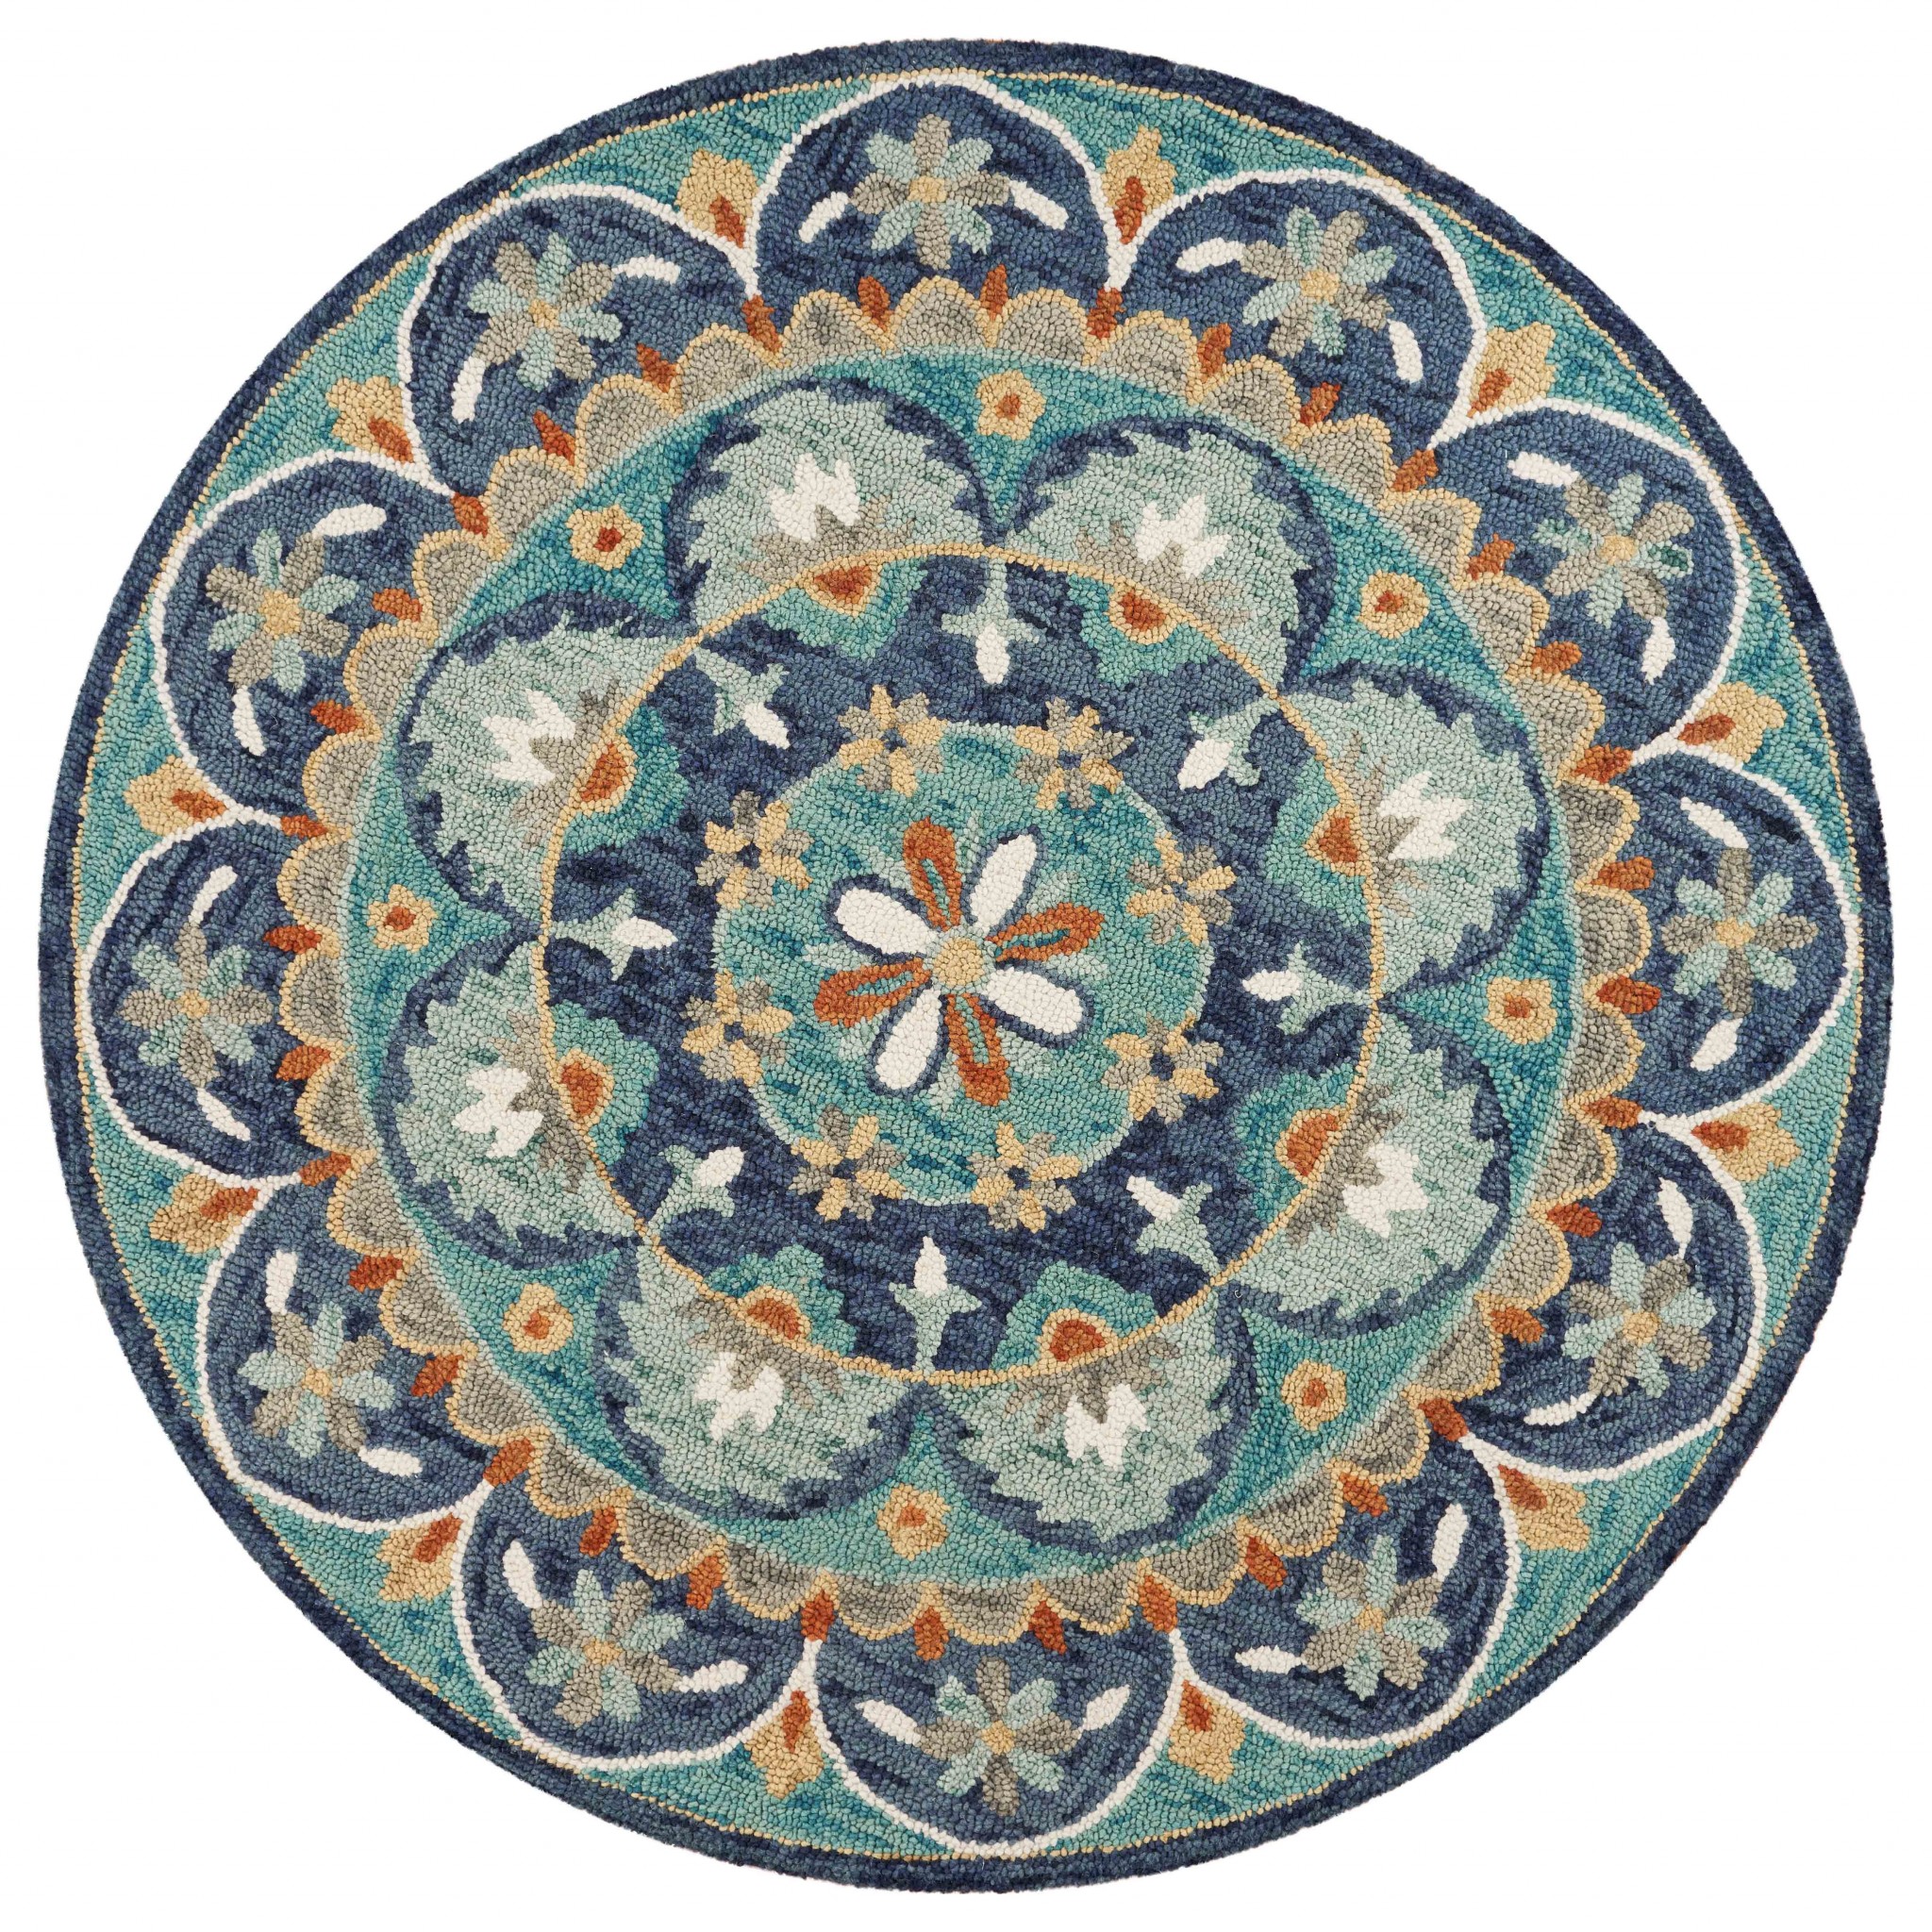 6' Blue And Green Round Wool Floral Hand Tufted Area Rug-393684-1